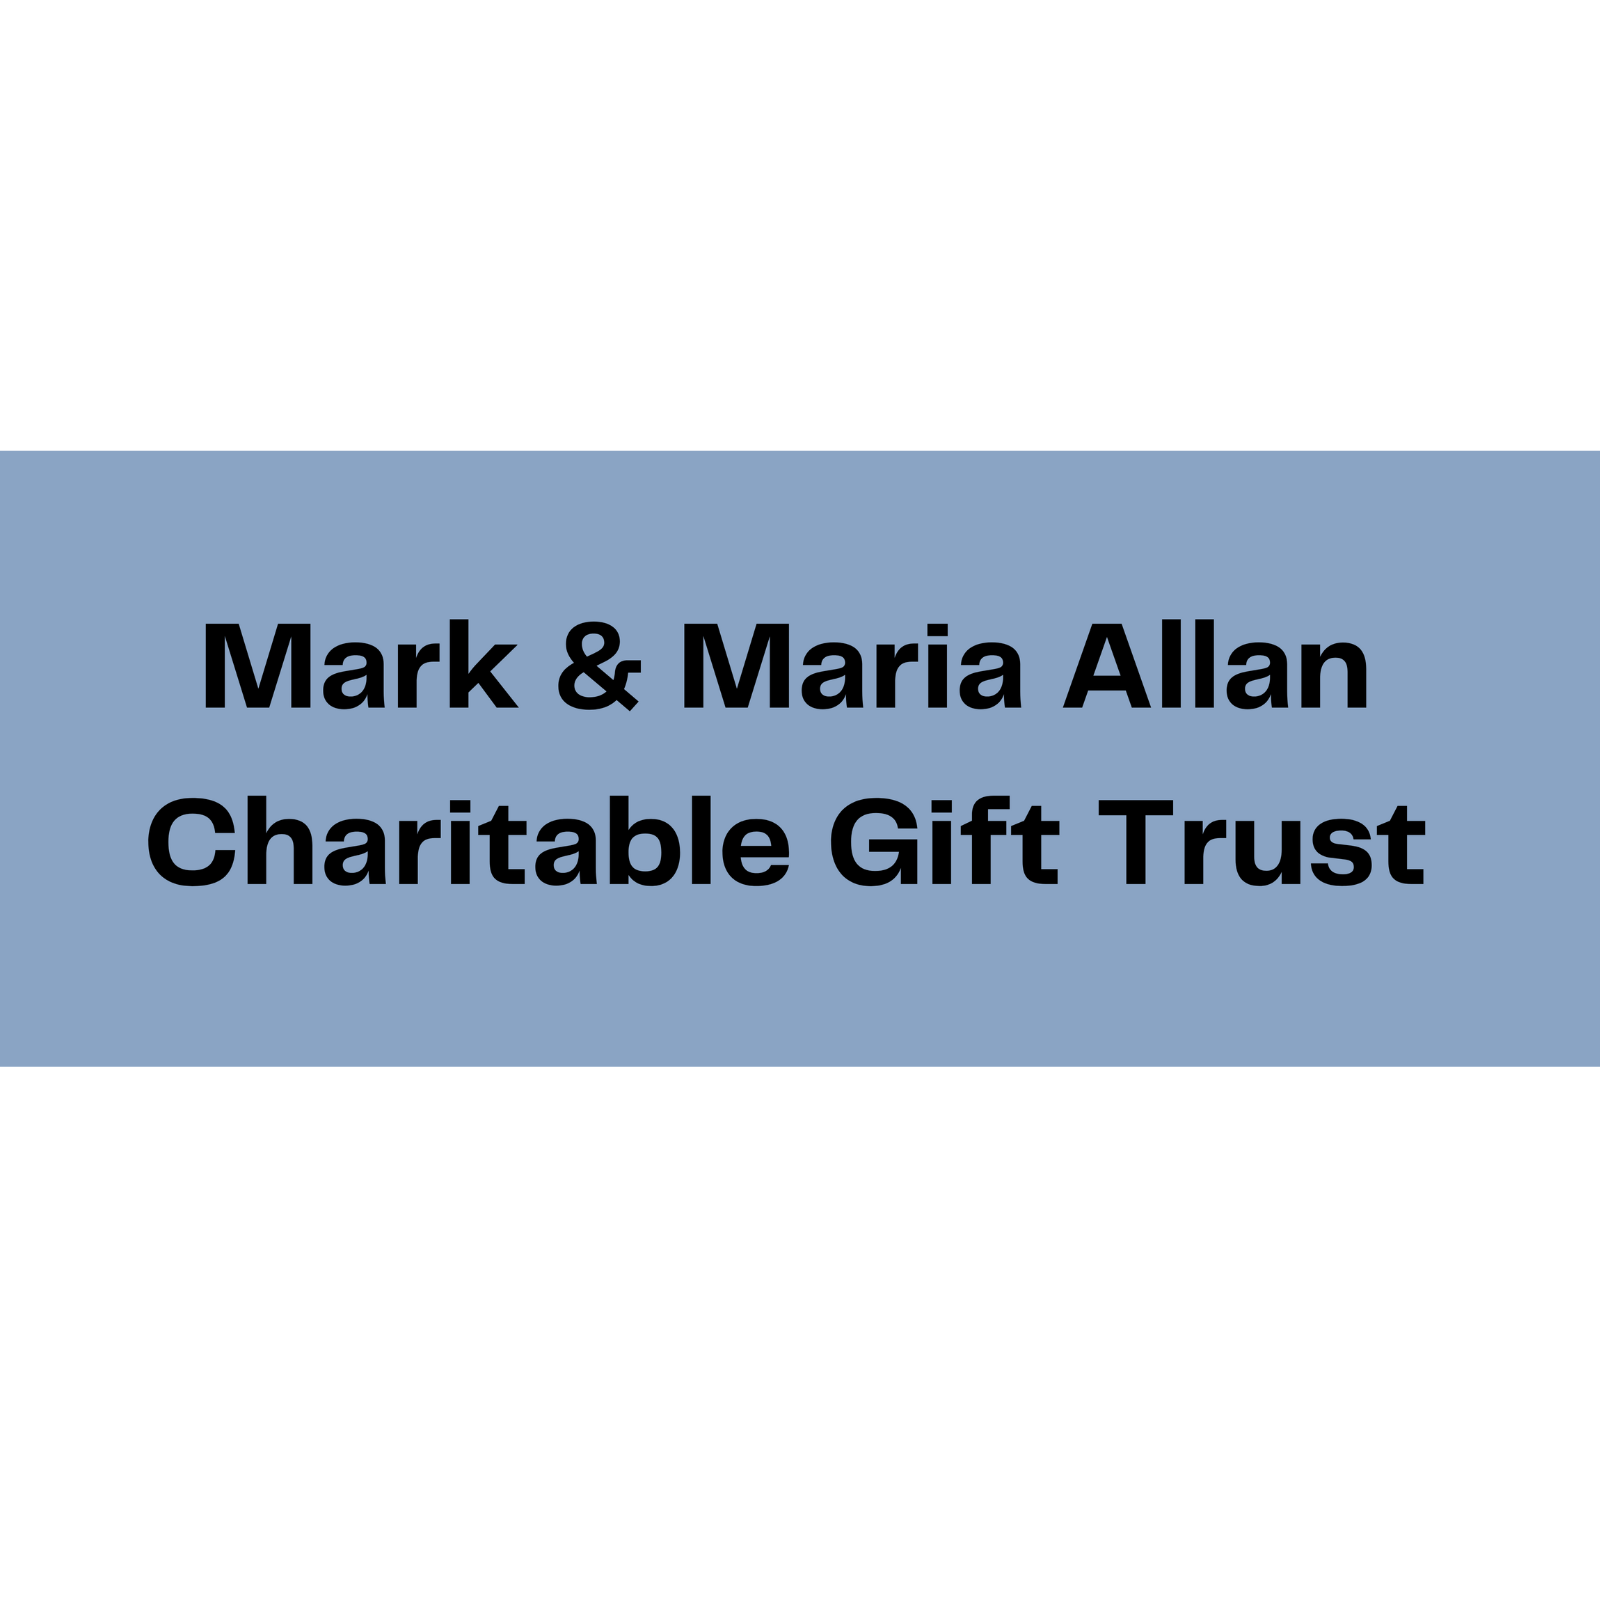 Mark & Maria Allan Charitable Gift Trust square.png